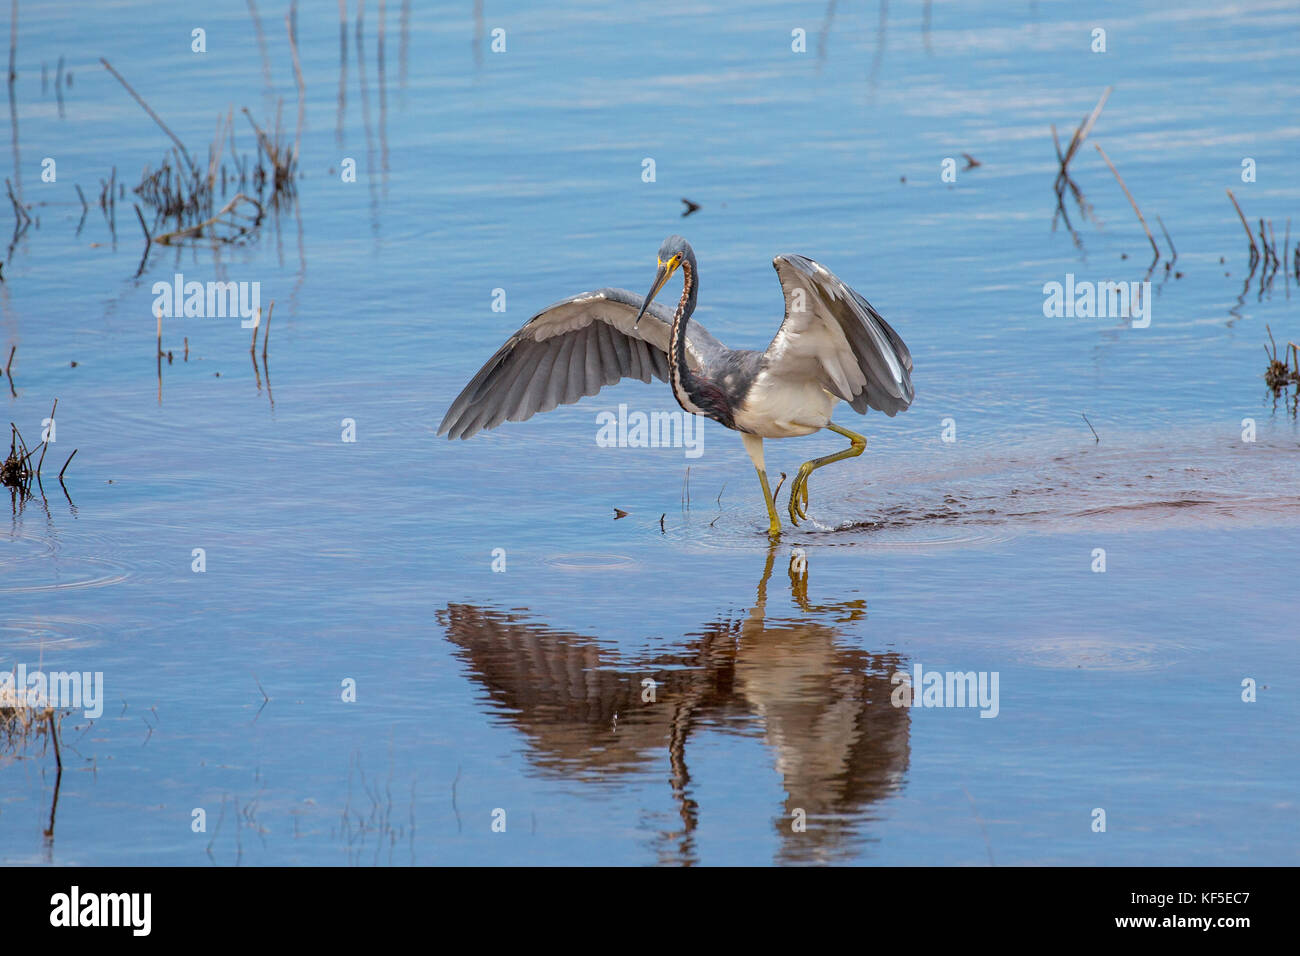 A adult tricolored heron (Egretta tricolor), formerly known in North America as the Louisiana heron searching for food in a calm shallow water pond Stock Photo